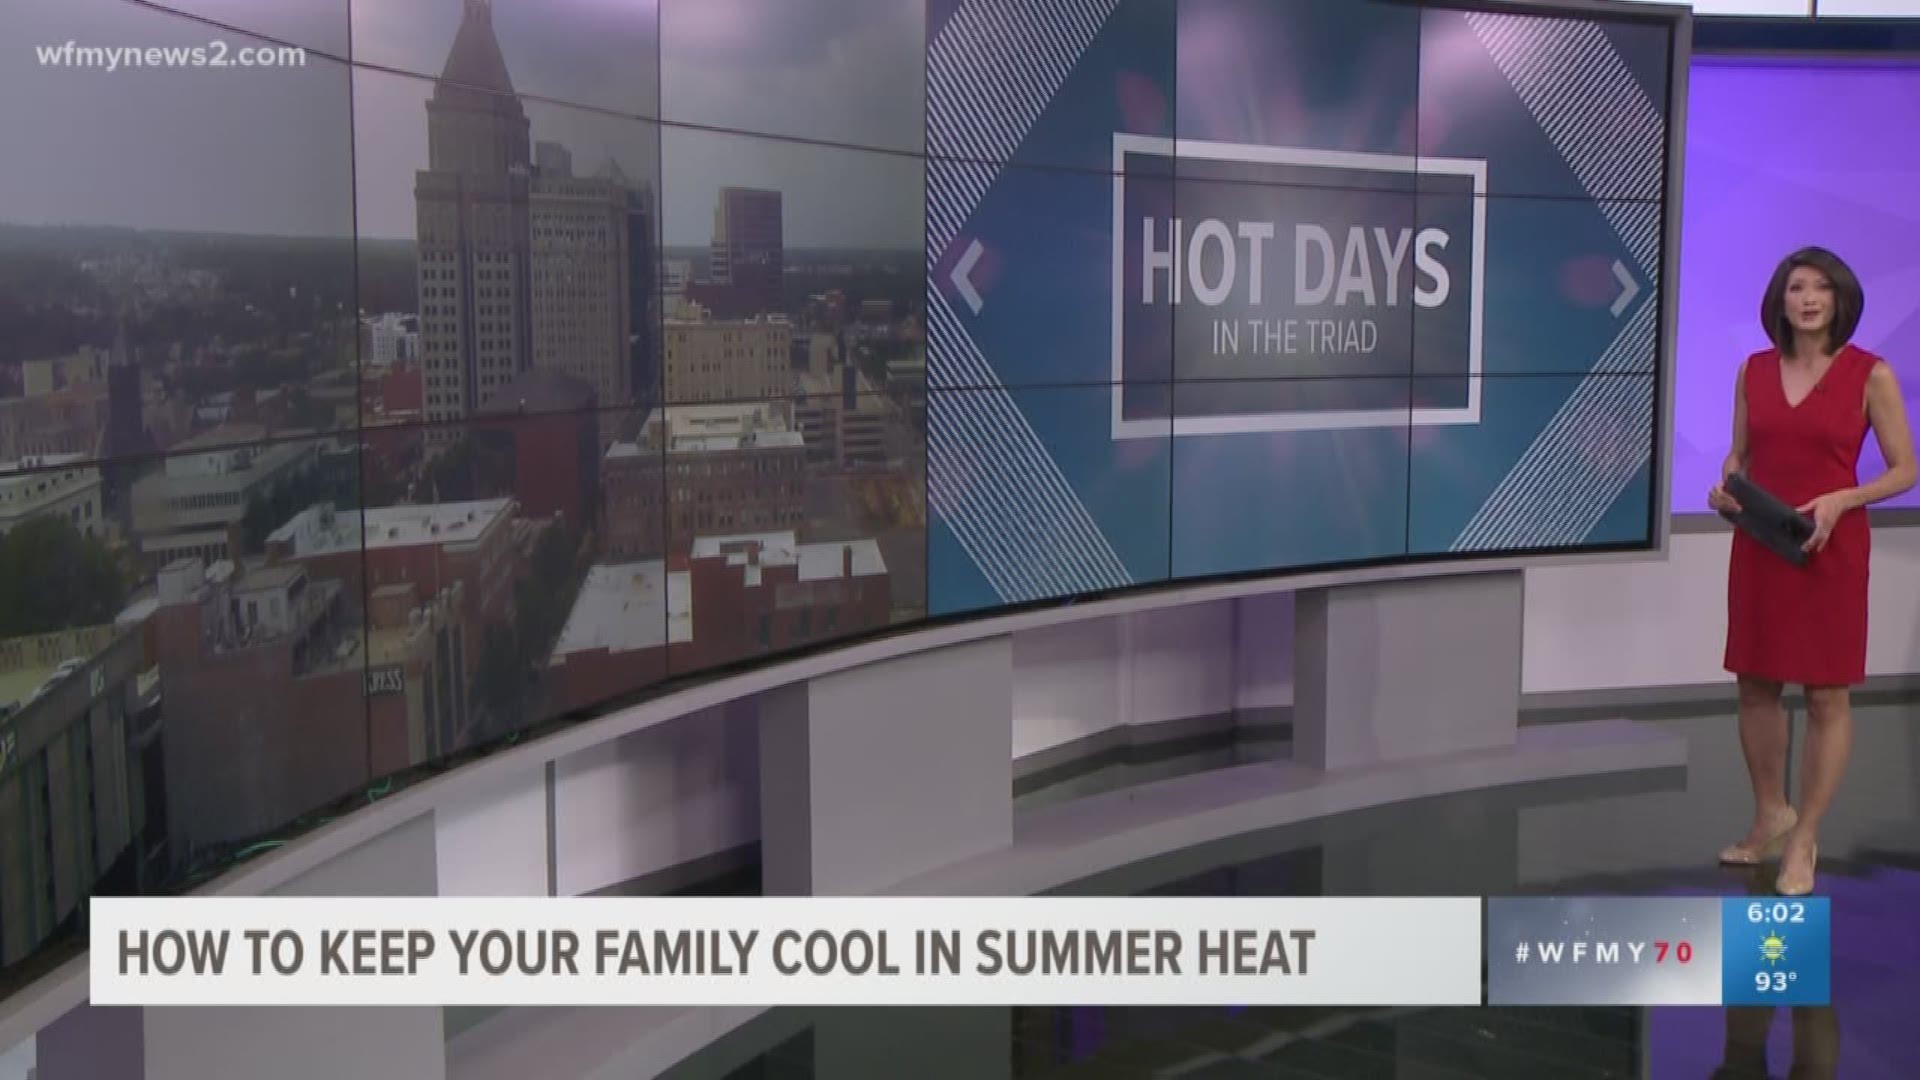 Check out these tips you probably aren't thinking about to try and stay cool.